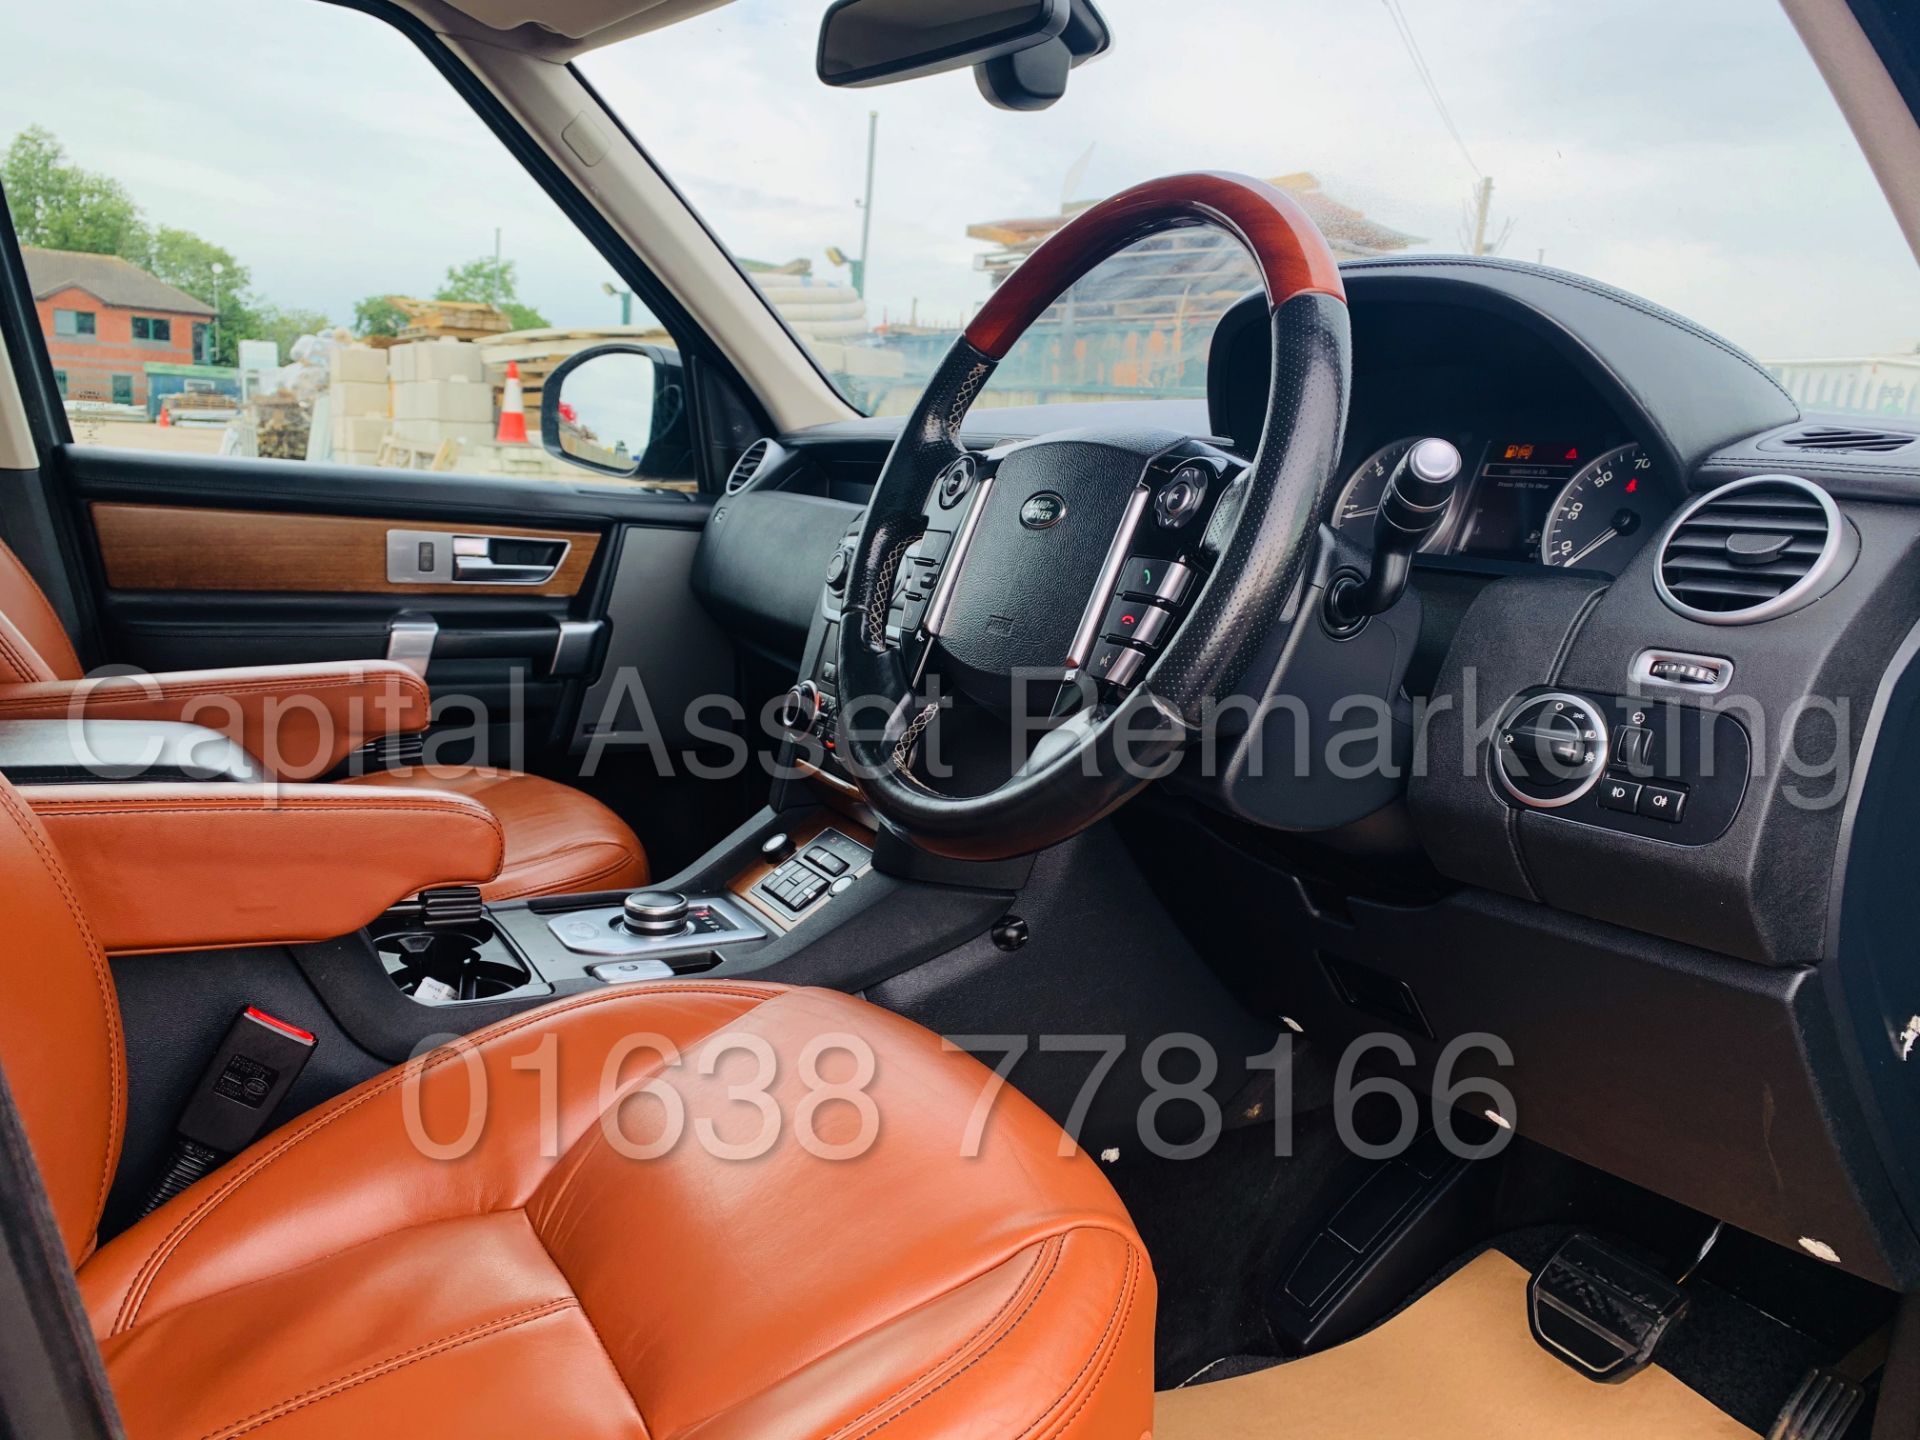 (On Sale) LAND ROVER DISCOVERY 4 *LANDMARK* 7 SEATER SUV (2016) '3.0 SDV6 - 8 SPEED AUTO' (1 OWNER) - Image 44 of 65